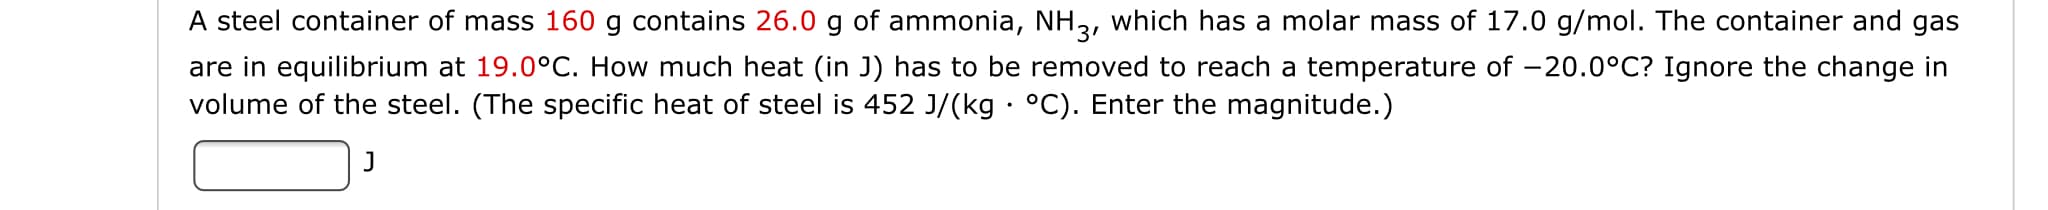 A steel container of mass 160 g contains 26.0 g of ammonia, NH2, which has a molar mass of 17.0 g/mol. The container and gas
are in equilibrium at 19.0°C. How much heat (in J) has to be removed to reach a temperature of
volume of the steel. (The specific heat of steel is 452 J/(kg °C). Enter the magnitude.)
20.0°C? Ignore the change in
